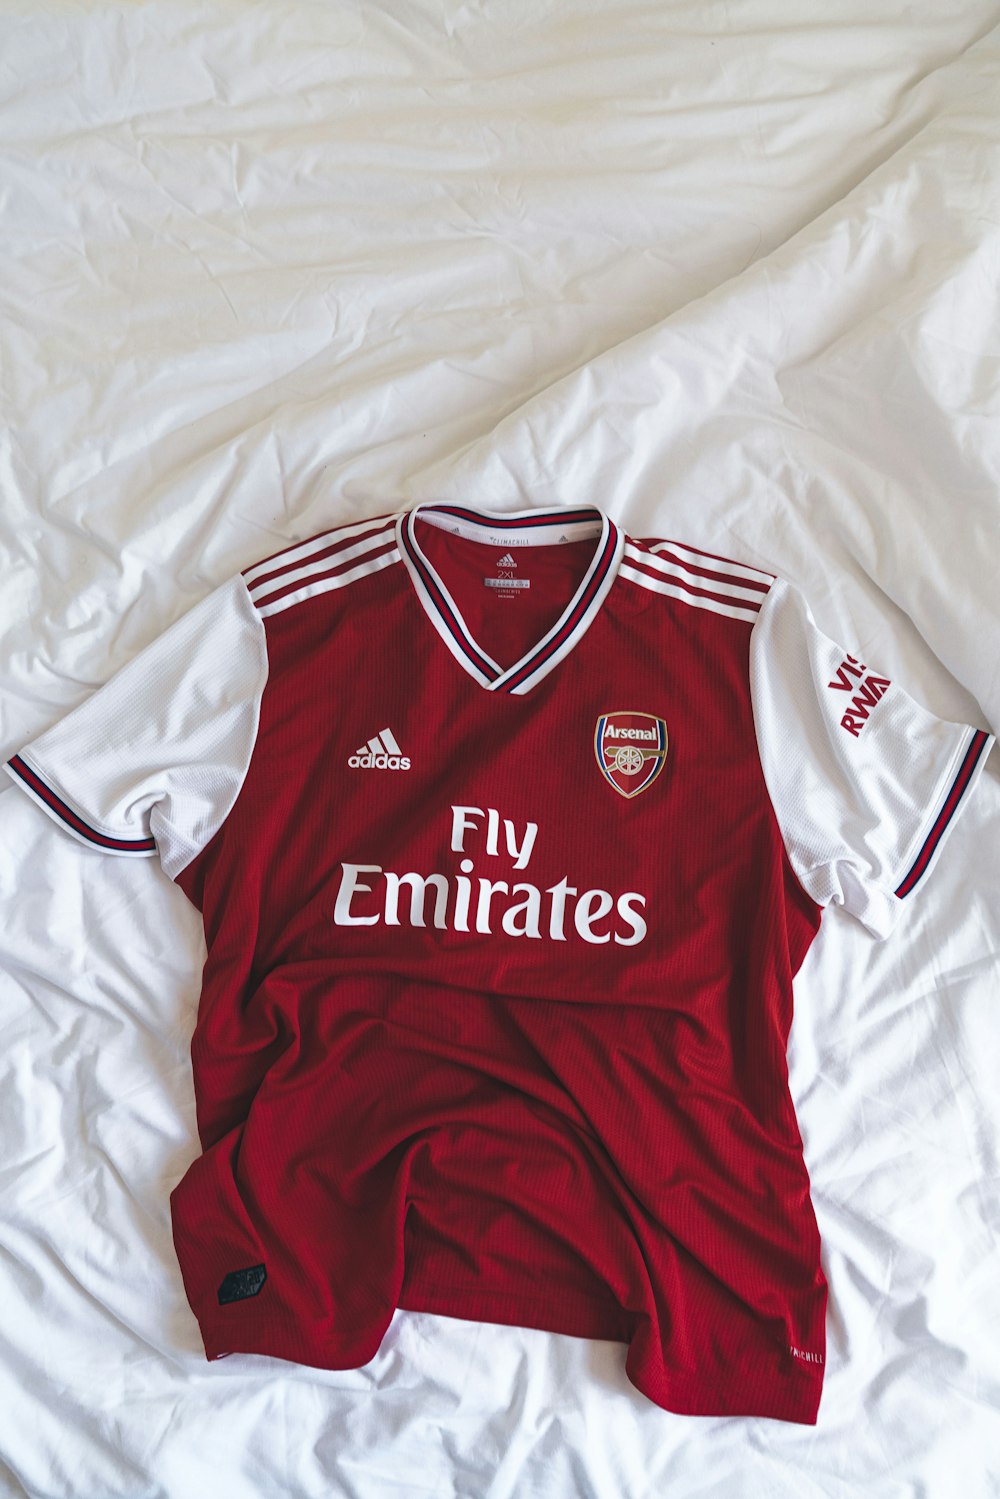 Football Jersey Pictures | Download Free Images on Unsplash